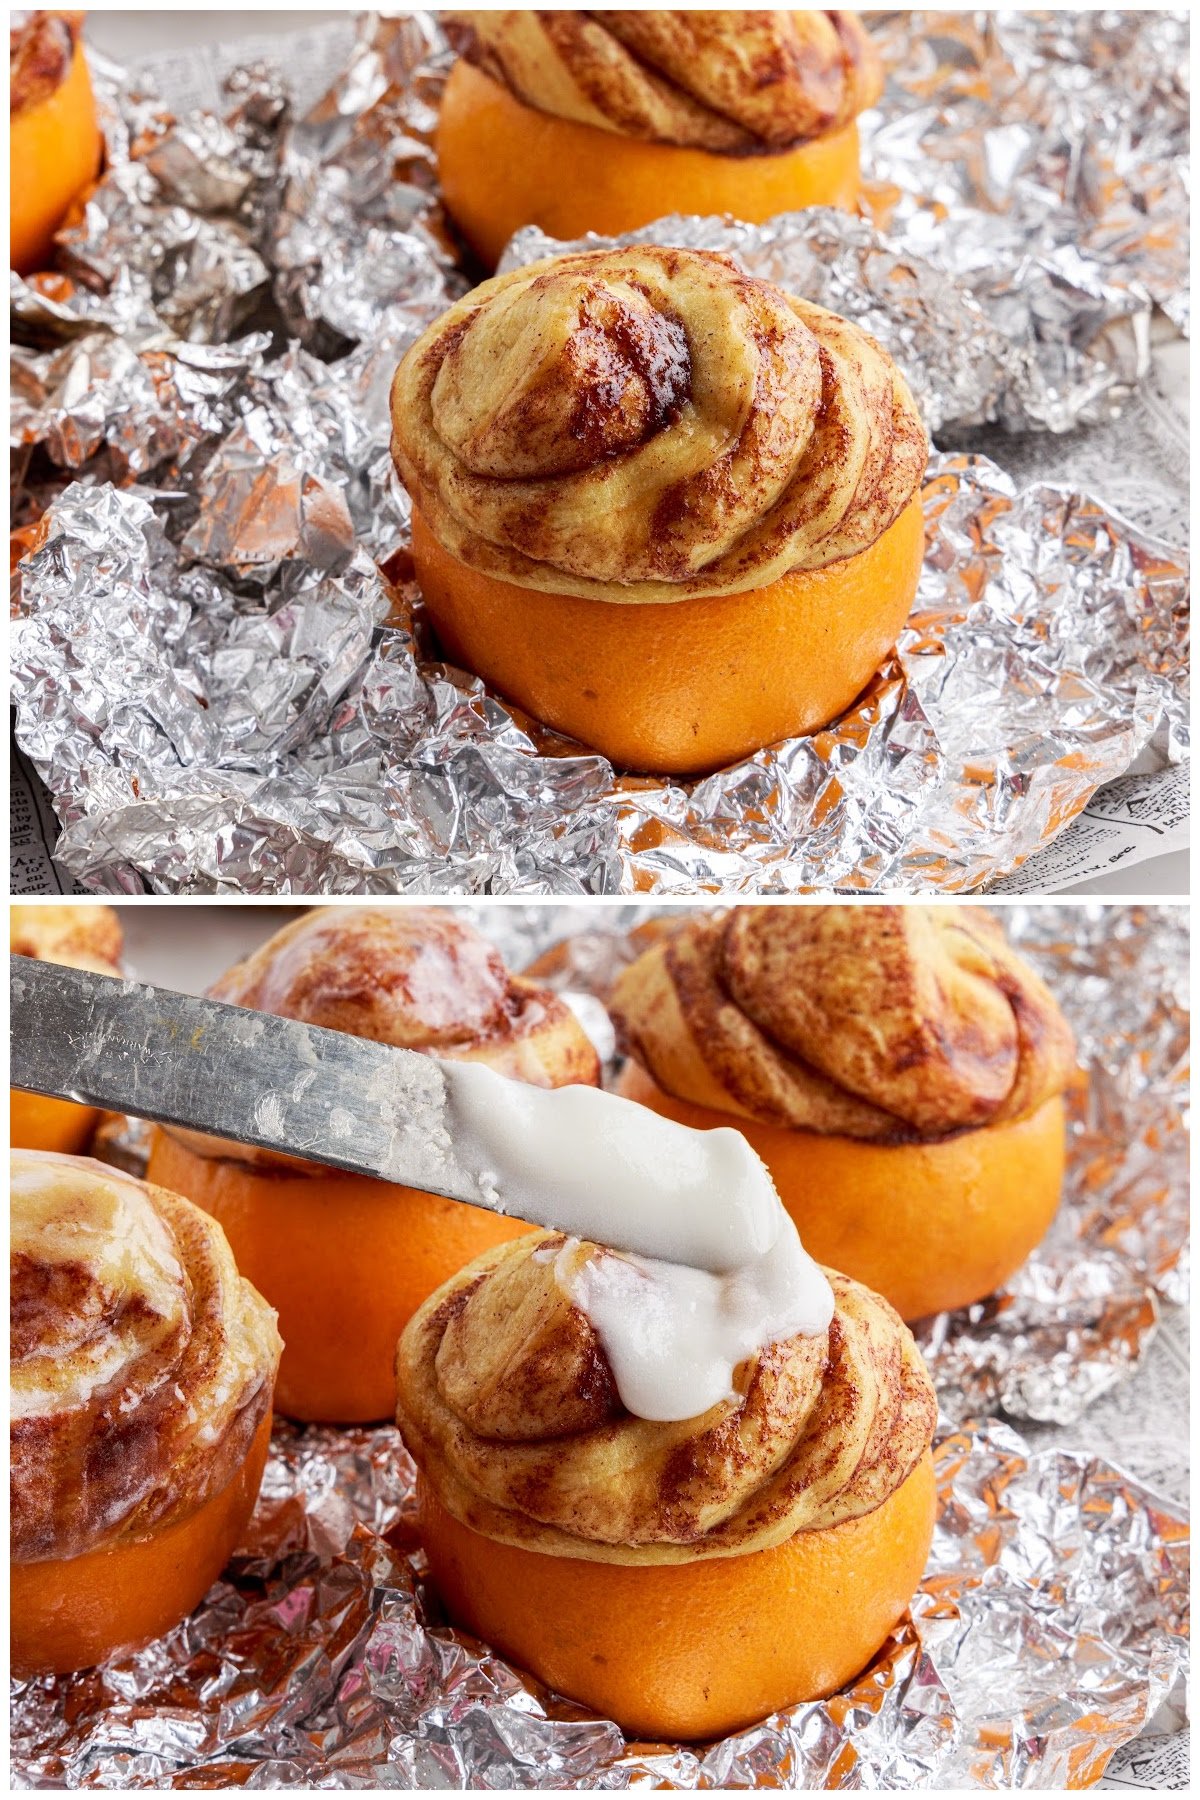 Baked and puffy campfire cinnamon roll set on aluminum foil with frosting being applied to top.